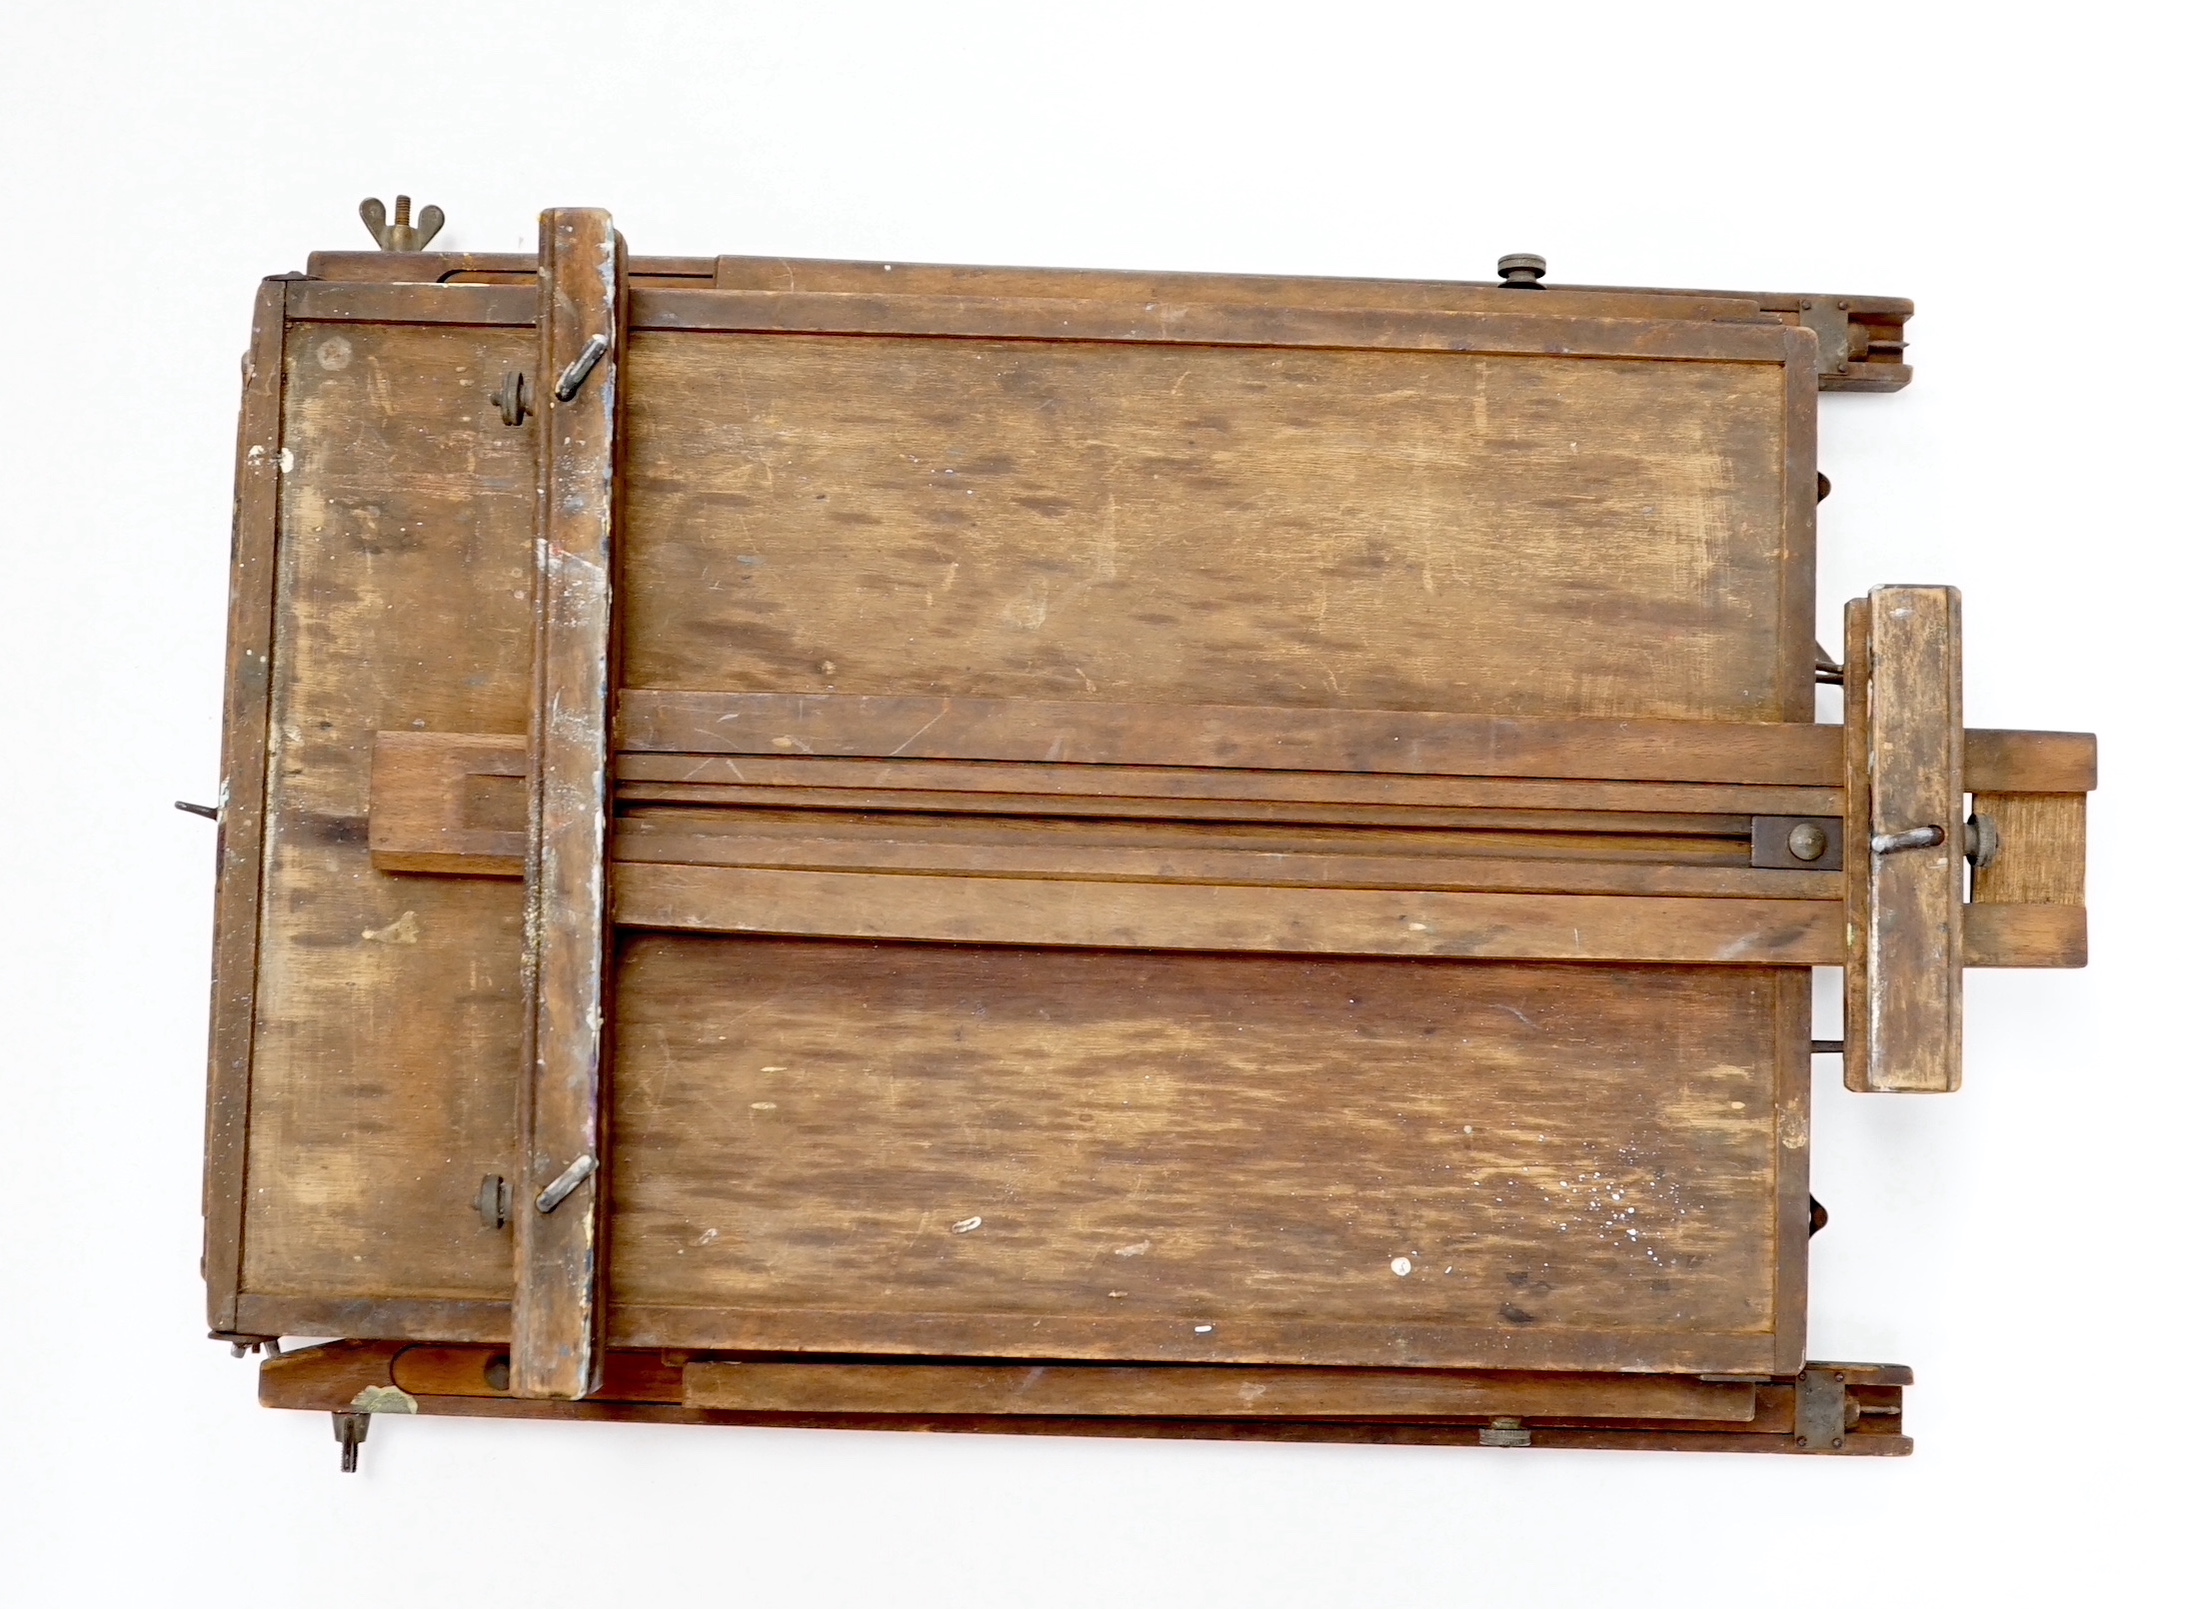 A 20th century folding artist's easel, 63cm when closed